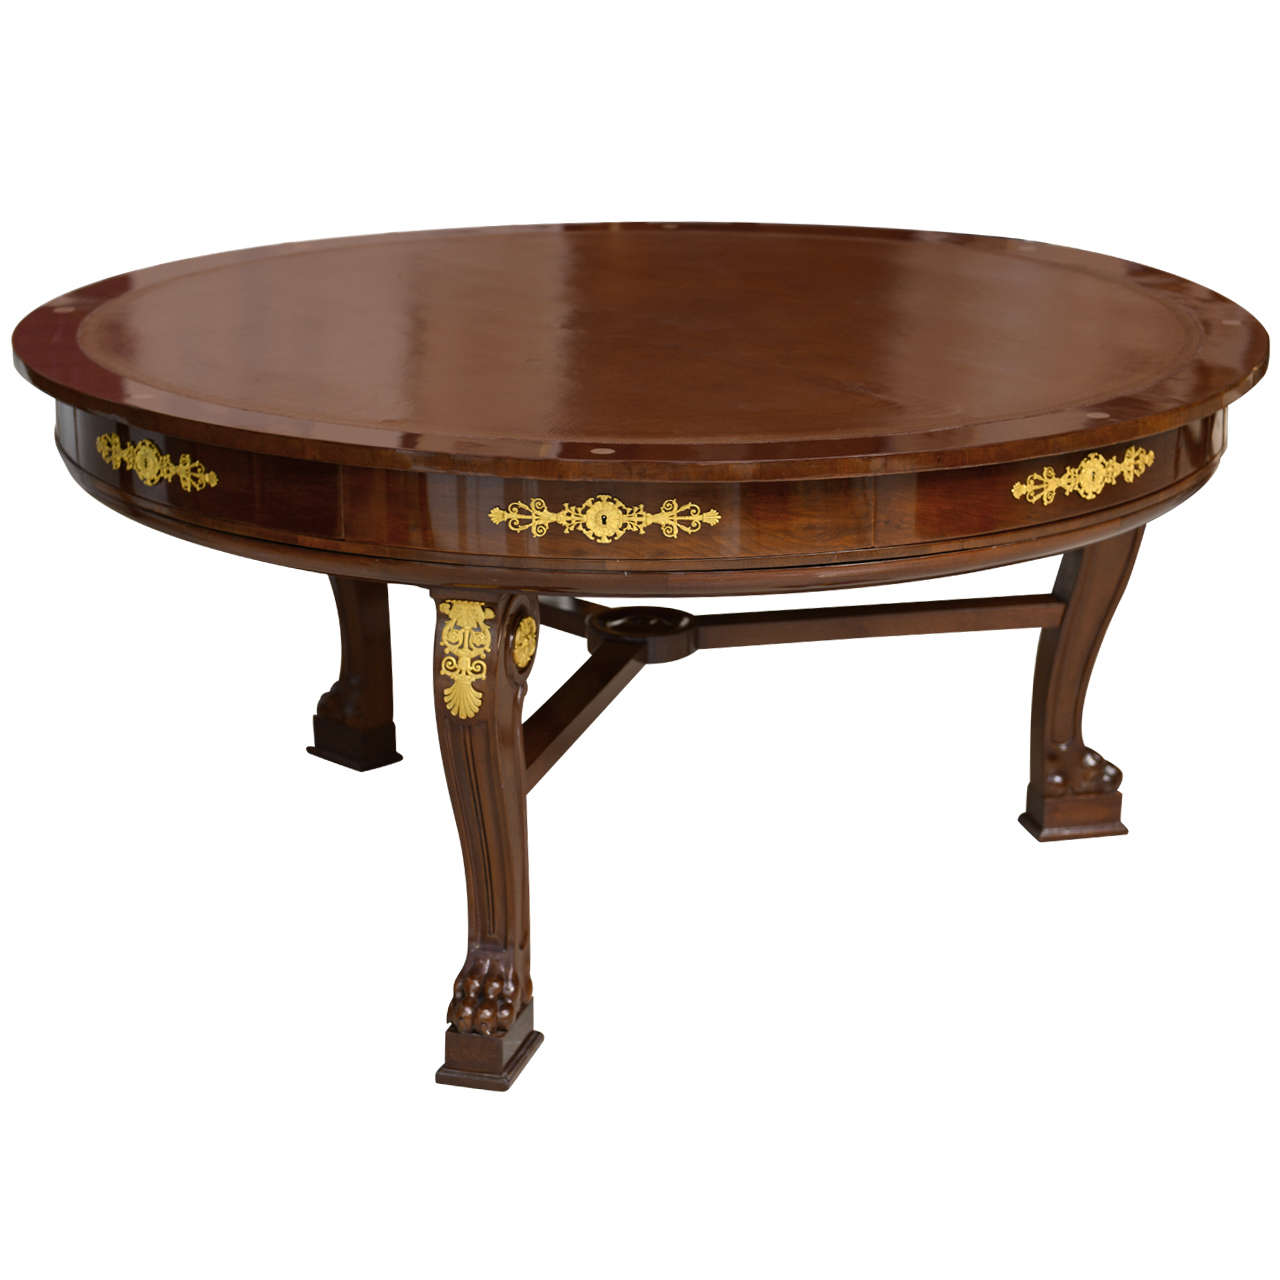 Very Fine French Empire Mahogany and Ormolu Mounted Rent Table, Potheau For Sale